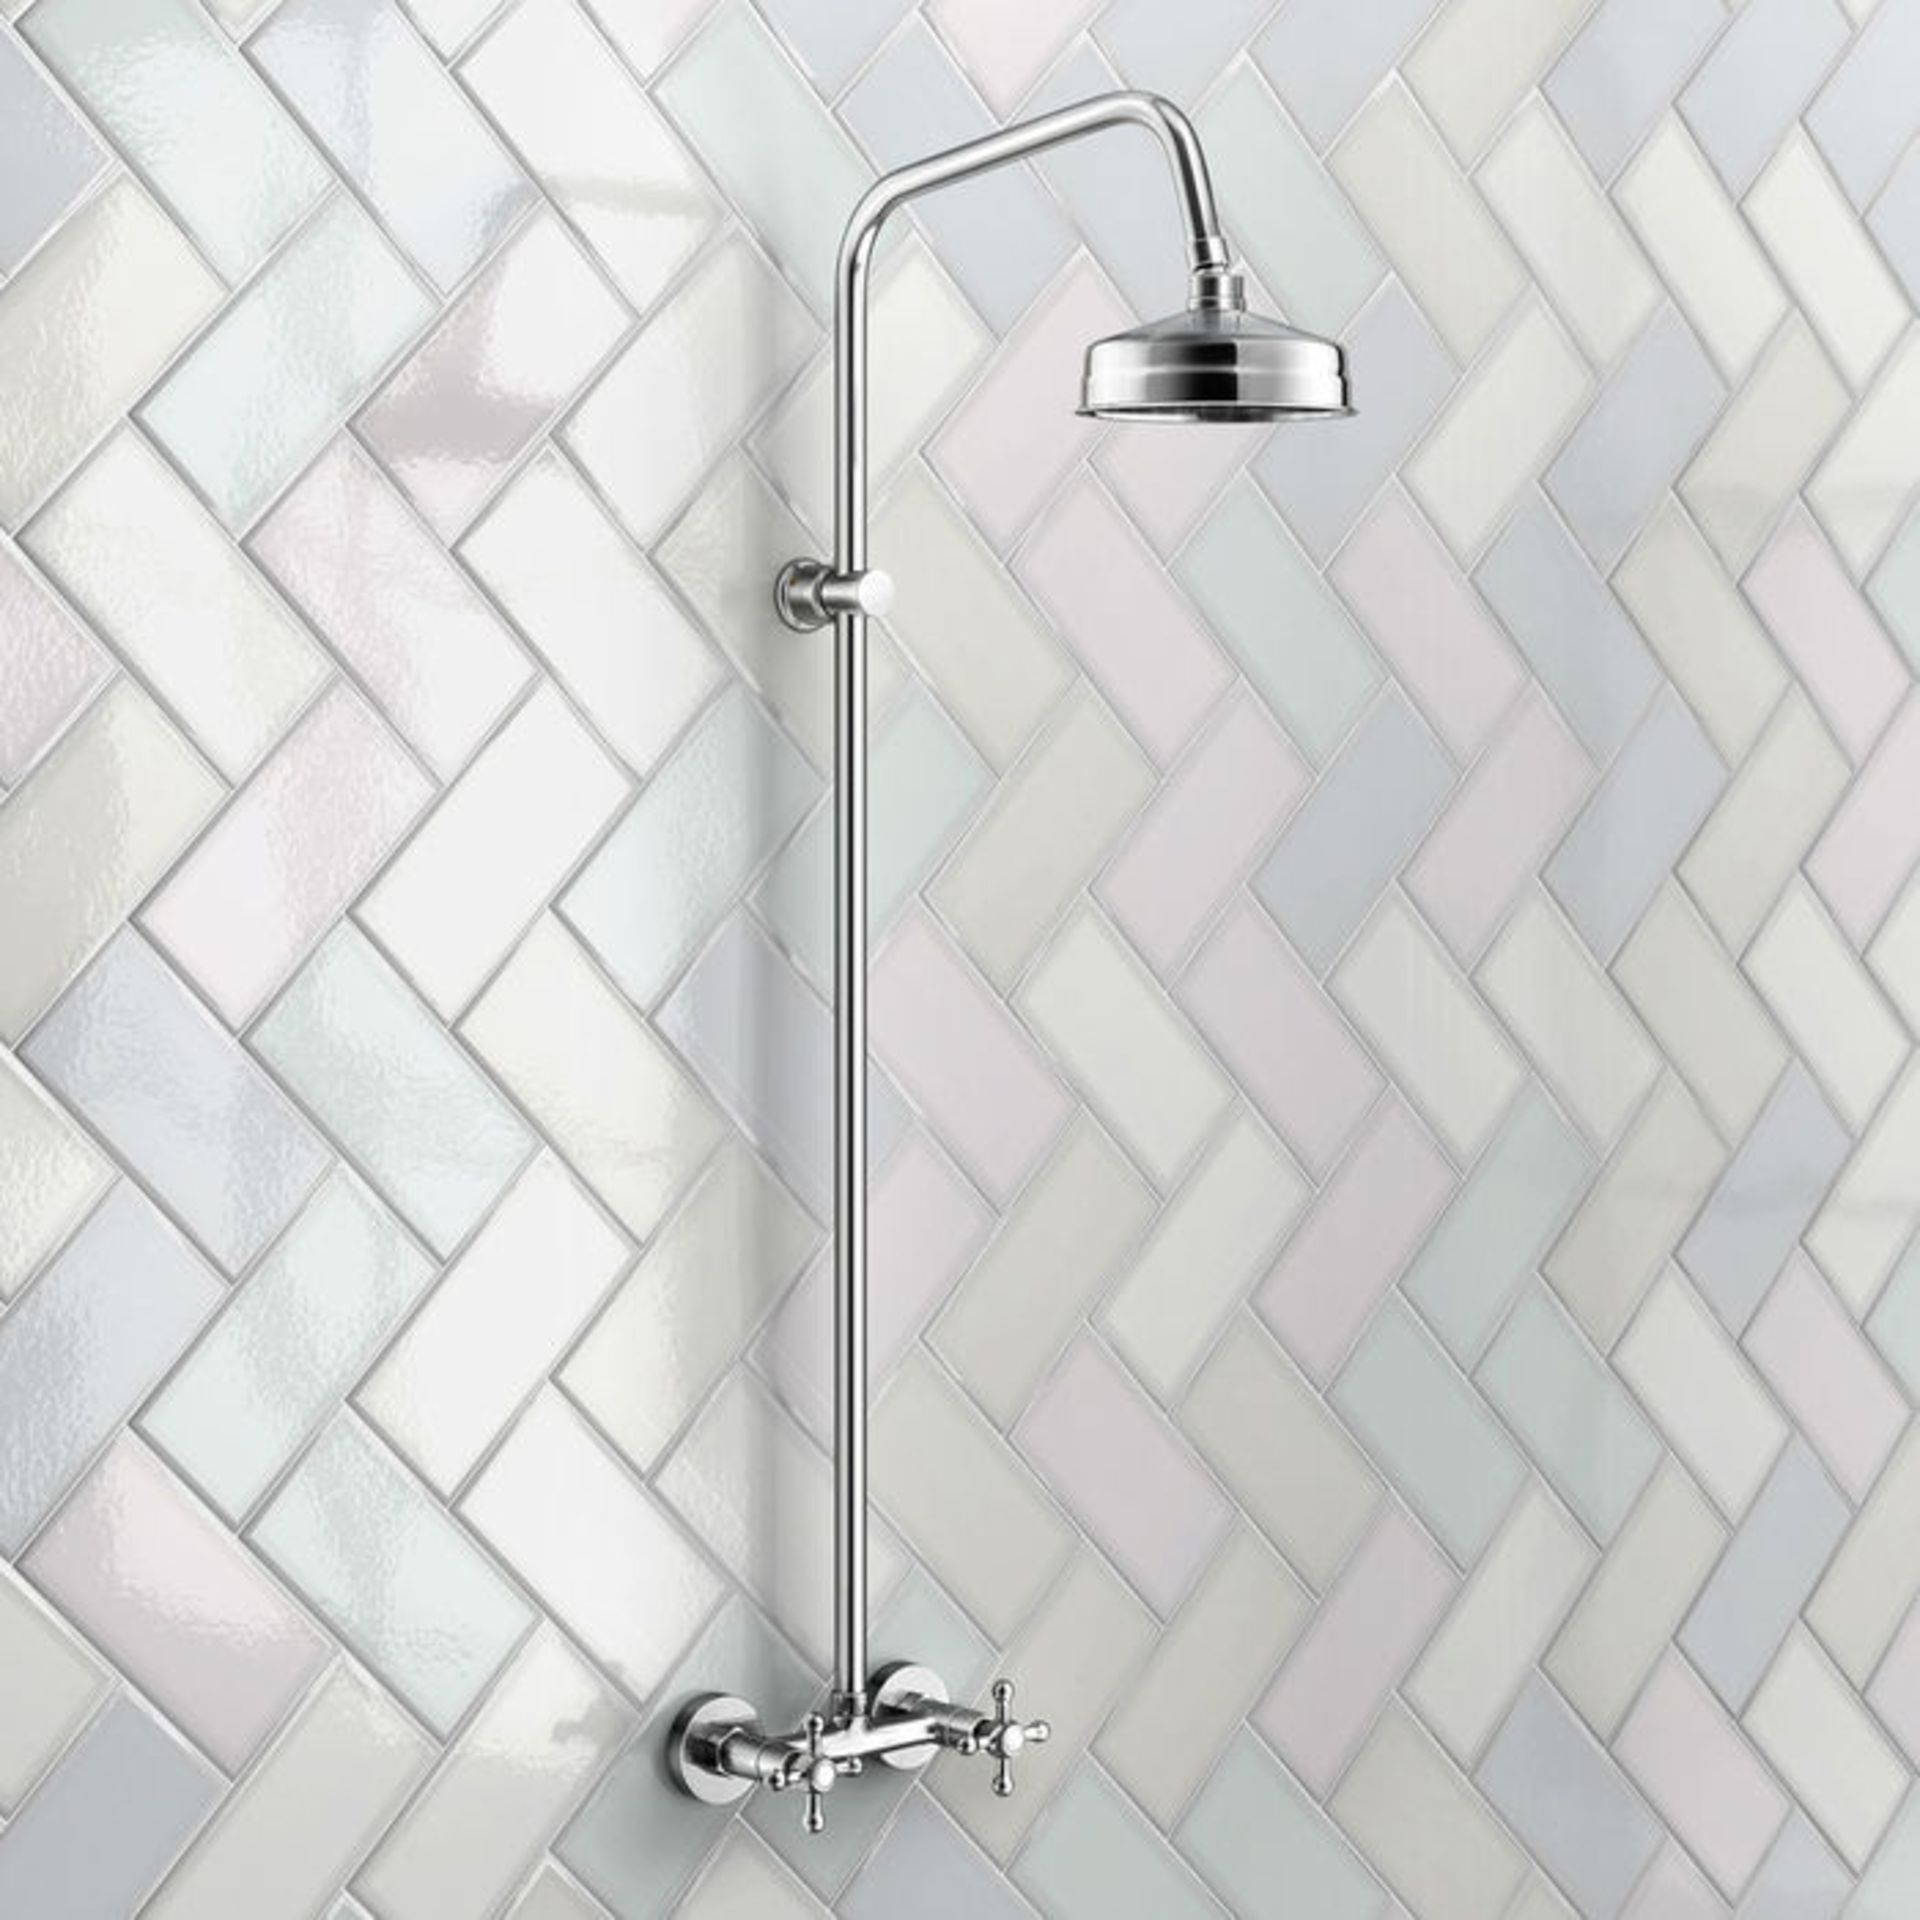 (UK149) Traditional Exposed Shower & Medium Head Exposed design makes for a statement piece Stunning - Image 3 of 3